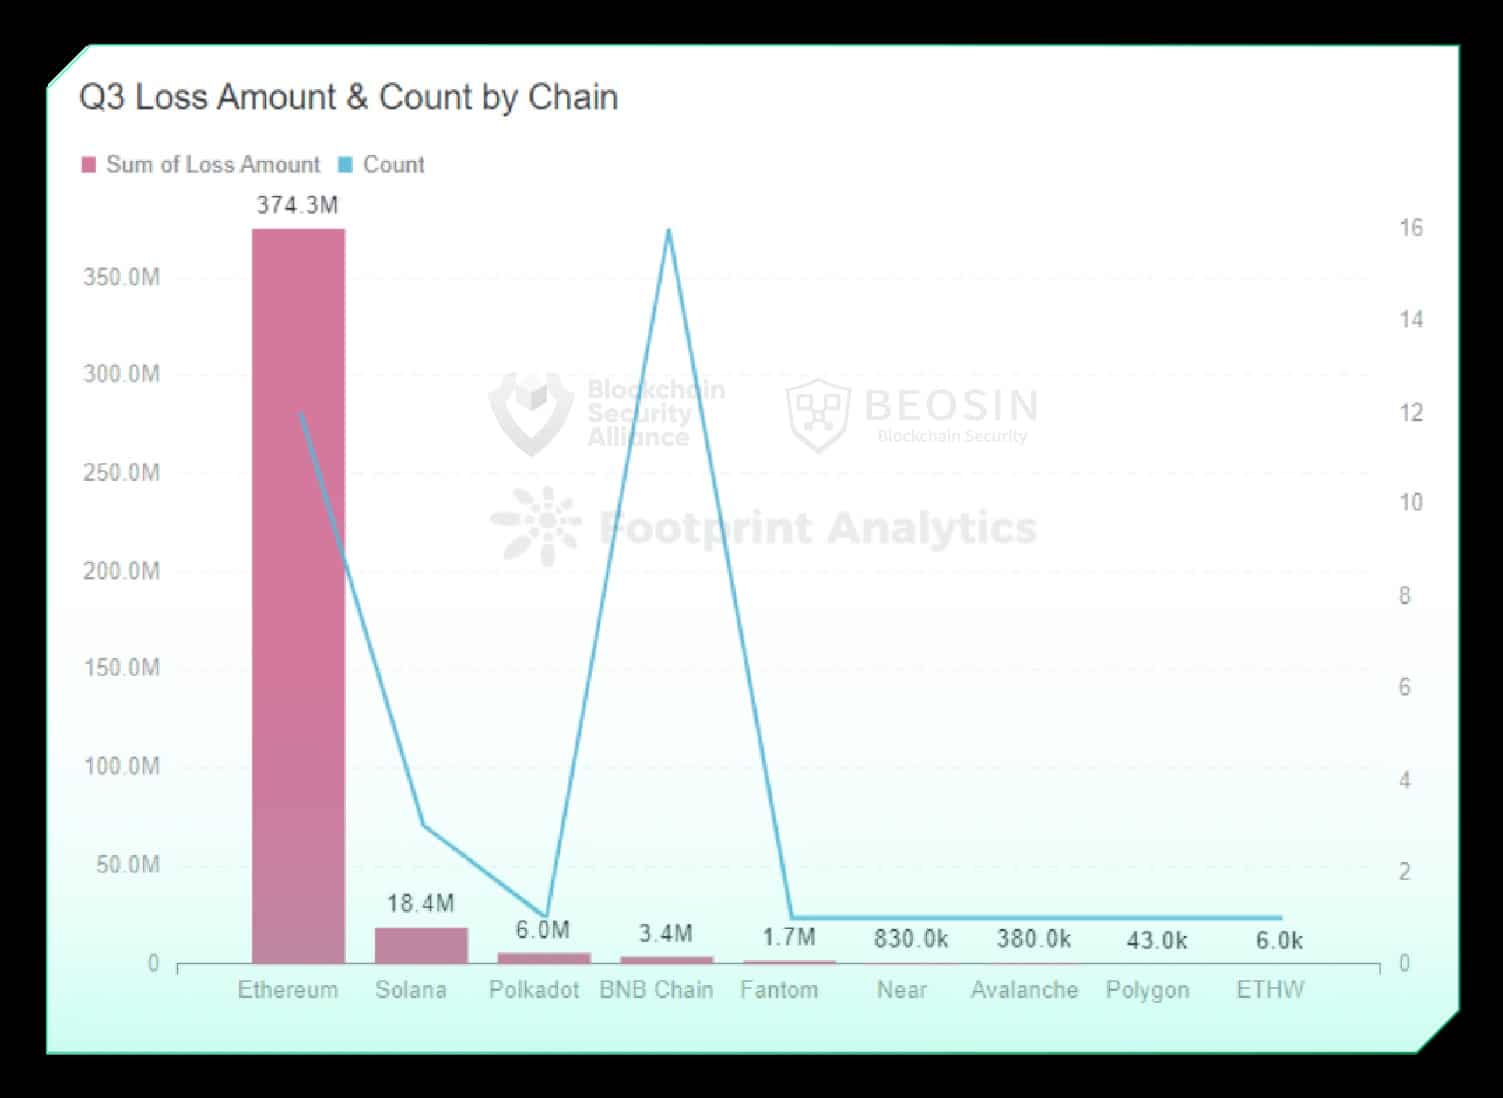 Q3 loss amount& count by chain